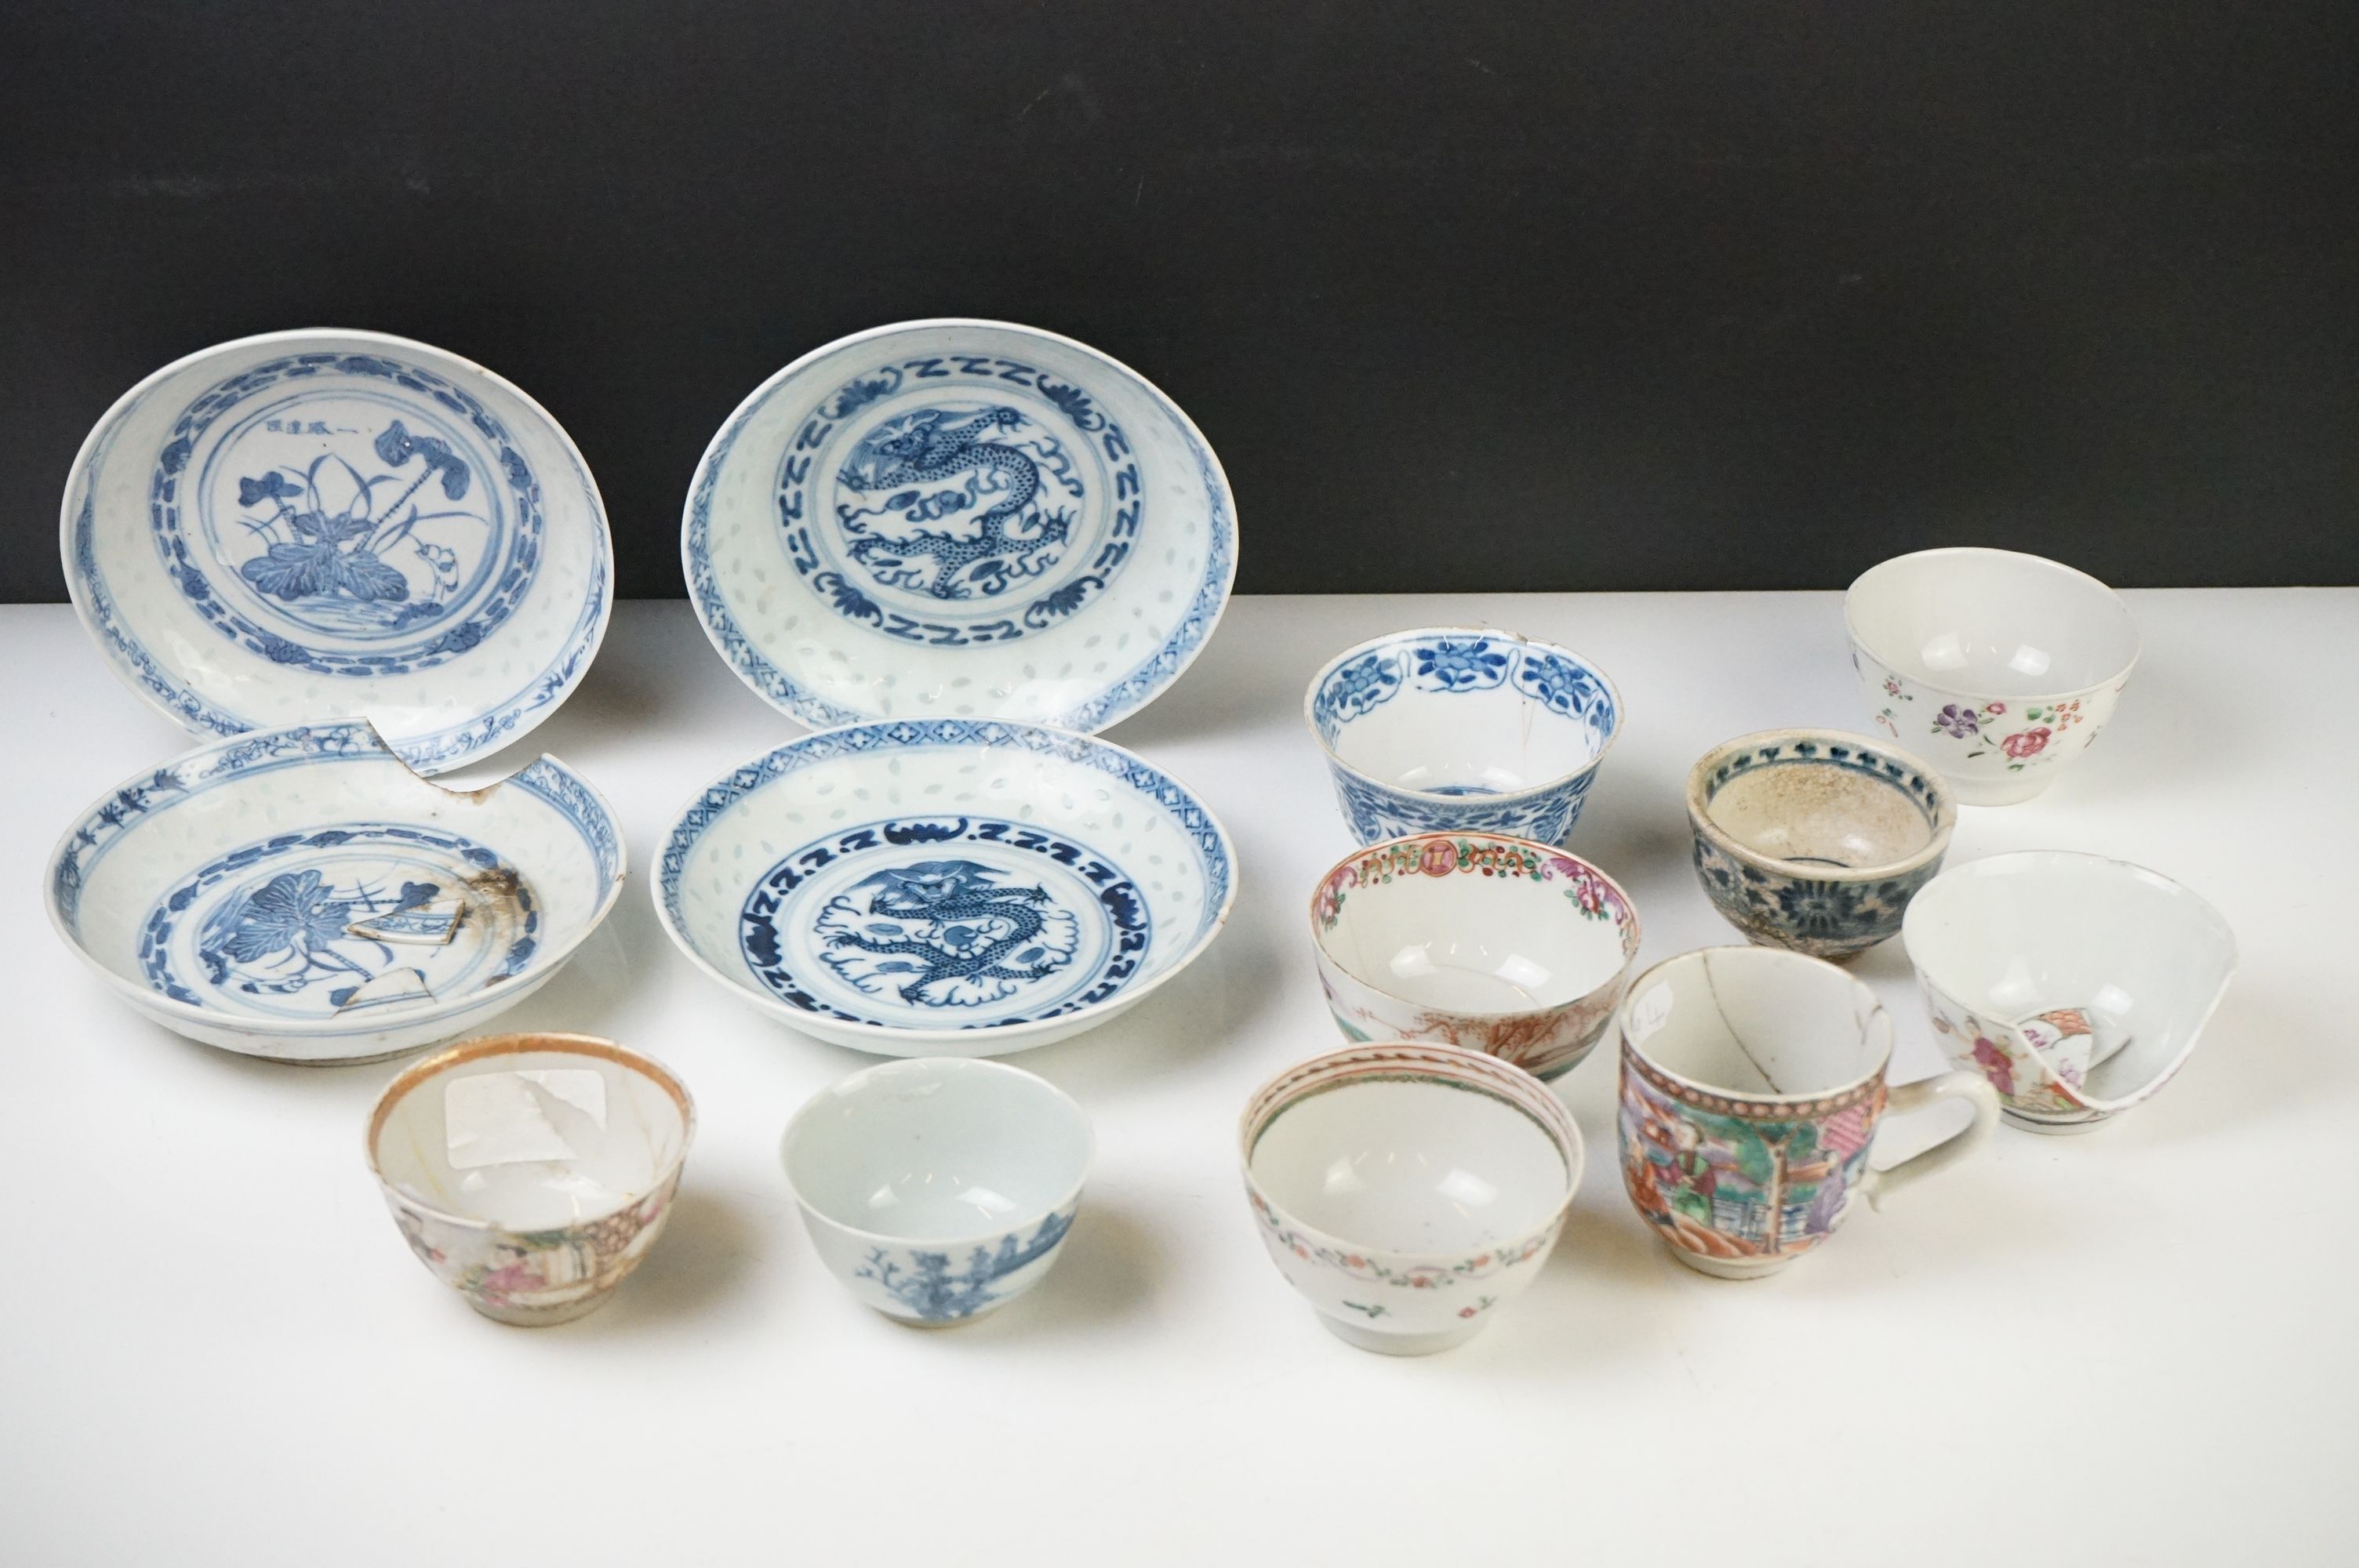 Collection of Chinese Tea Bowls, Cups and Saucers, 18th century onwards, mainly famille rose and